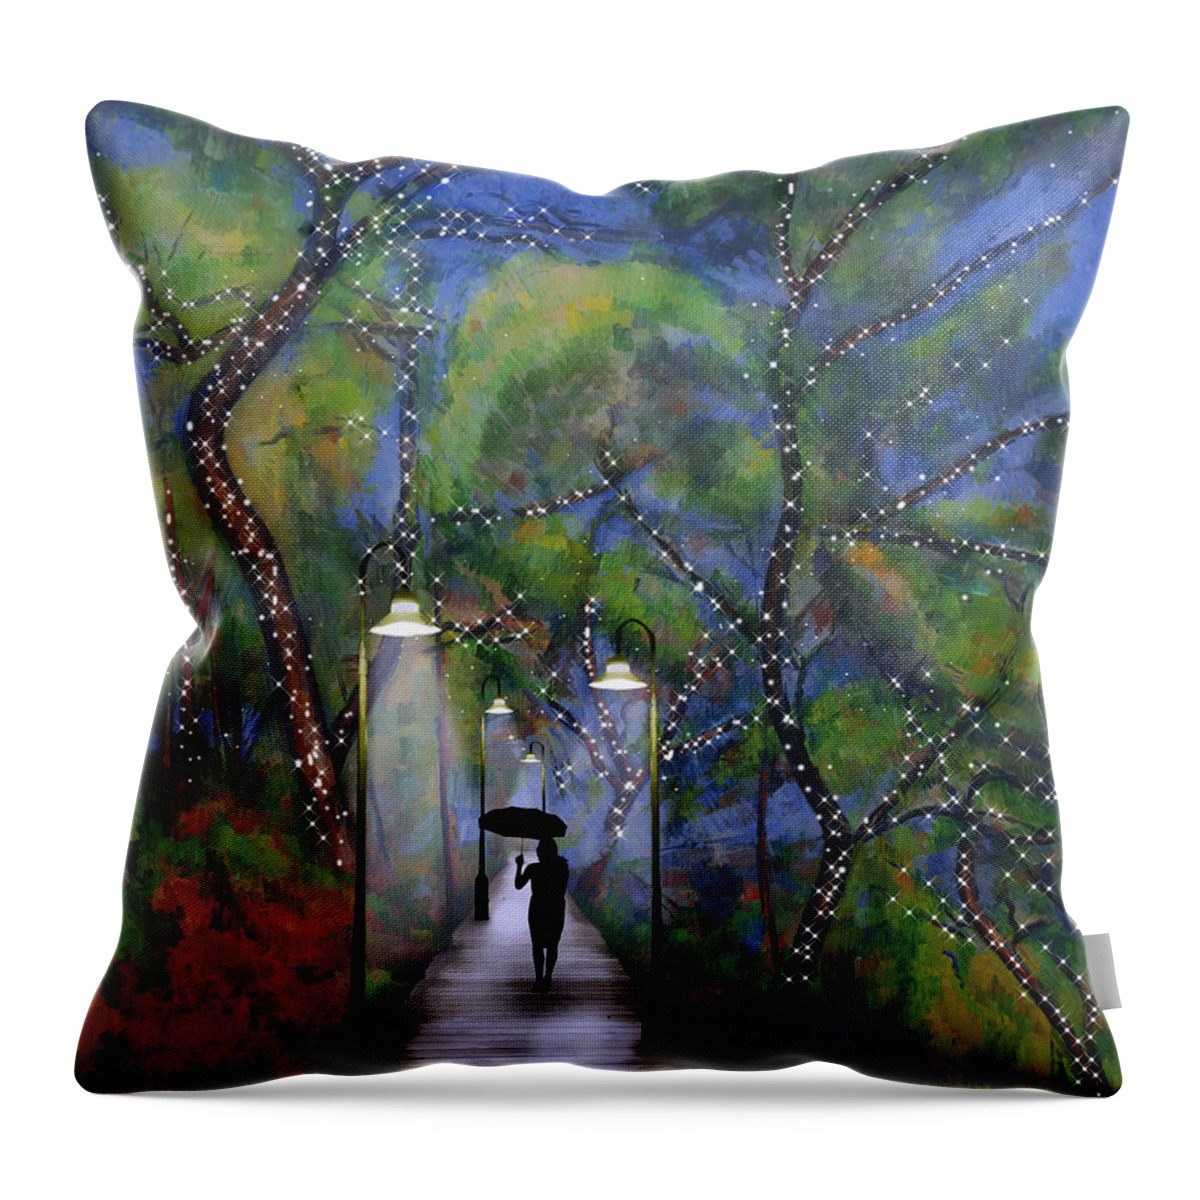 Woods Throw Pillow featuring the digital art The Enchanted Woods by Nina Bradica